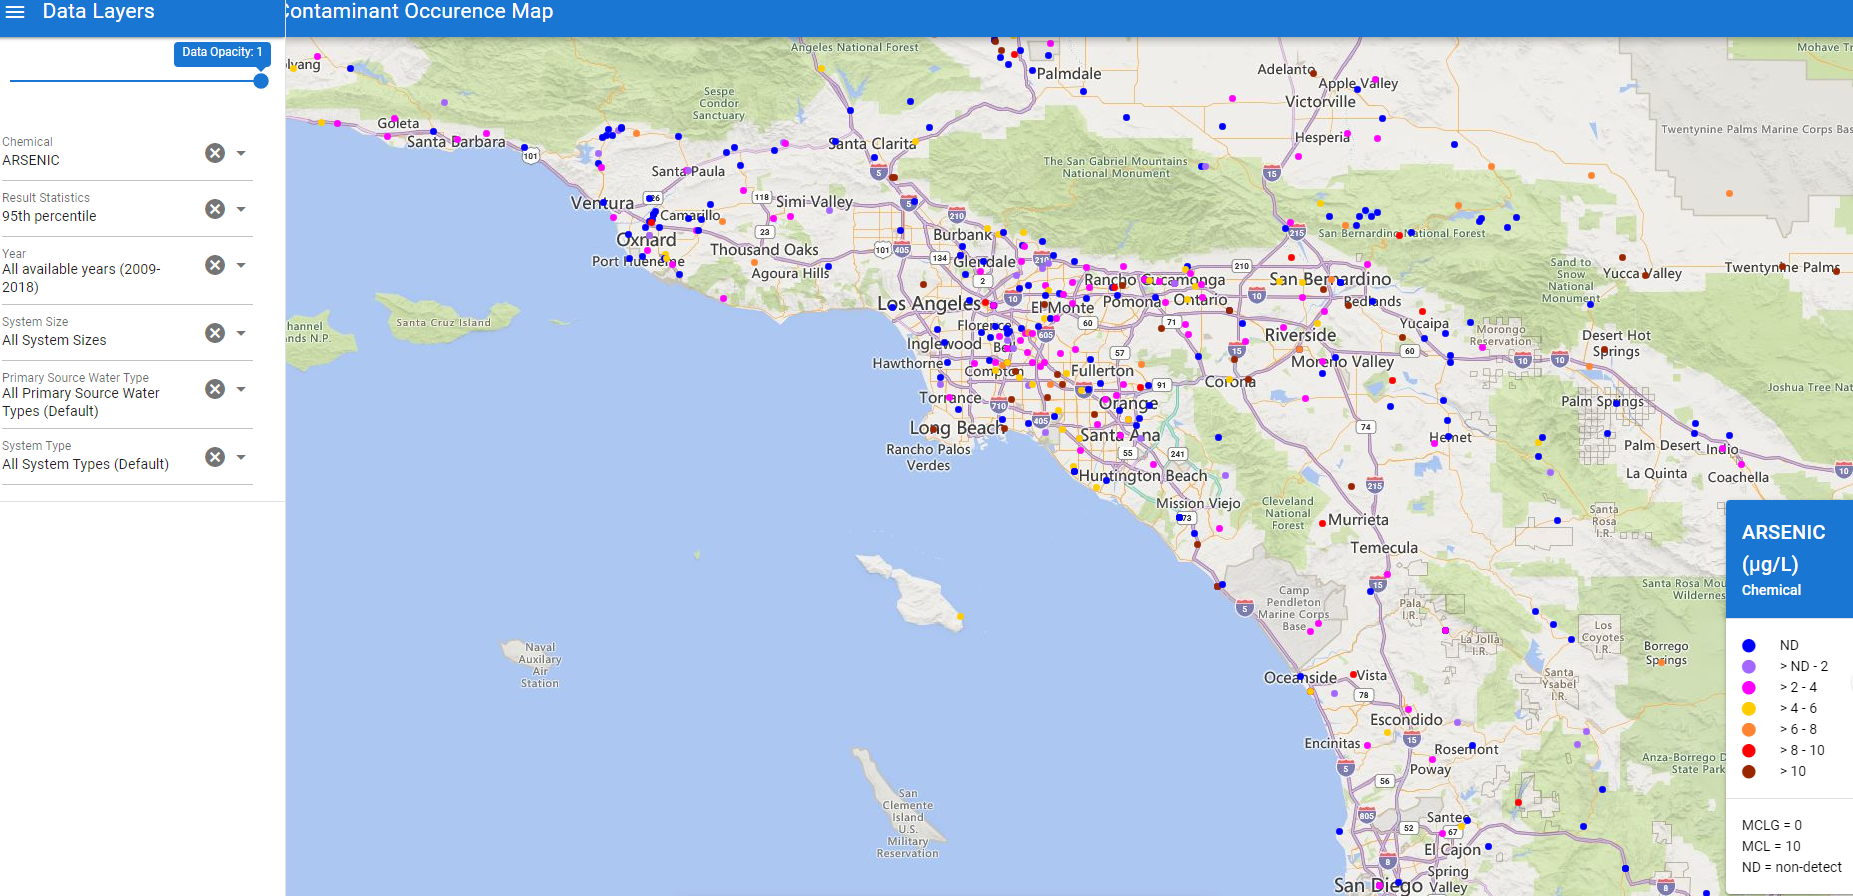 WQRF Arsenic Contamination Map Southern California